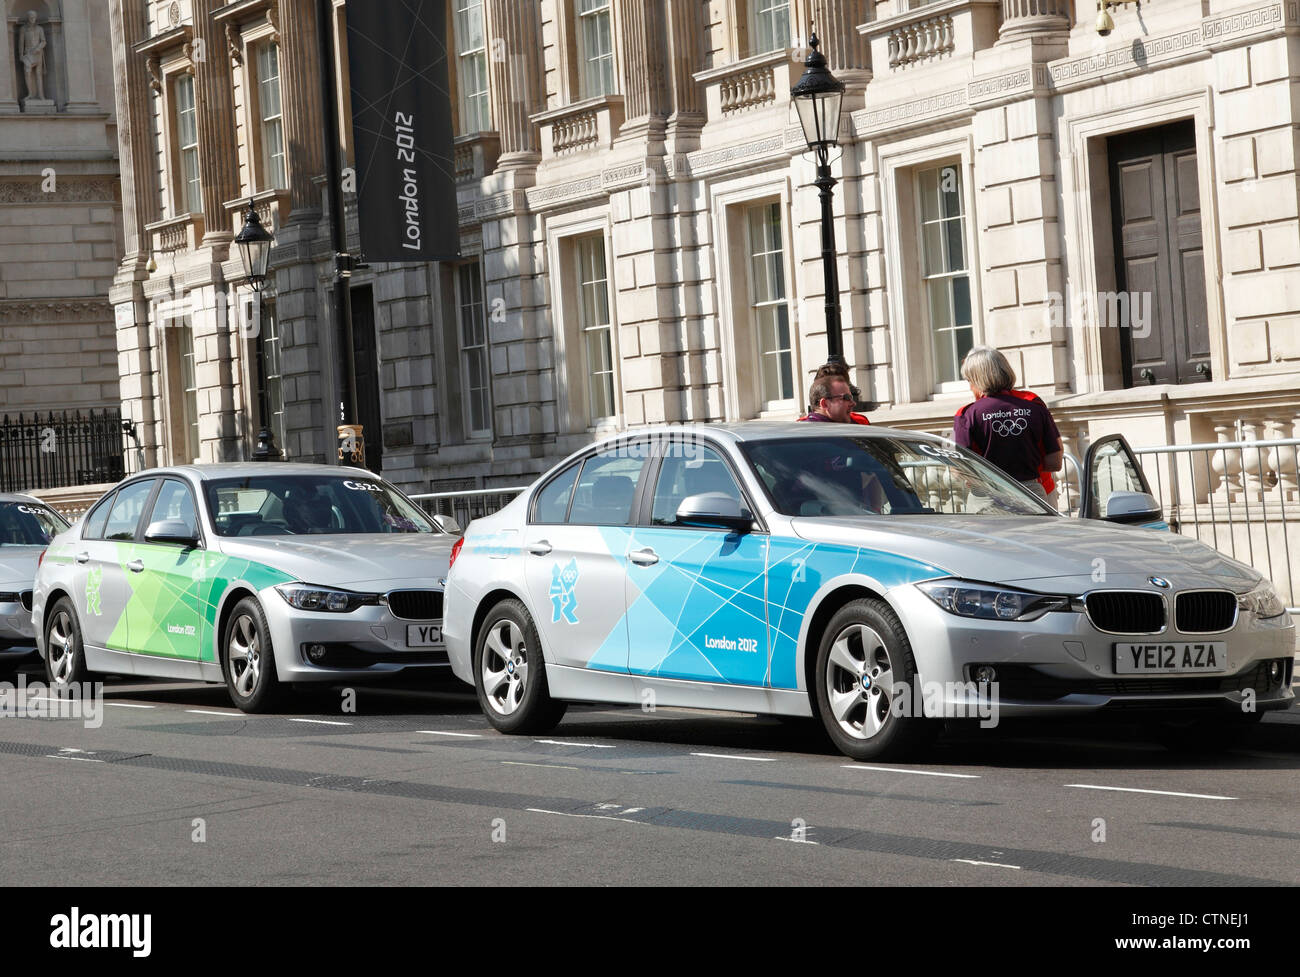 London 2012 official Olympic BMW cars on Whitehall, Westminster, London, England, U.K. Stock Photo